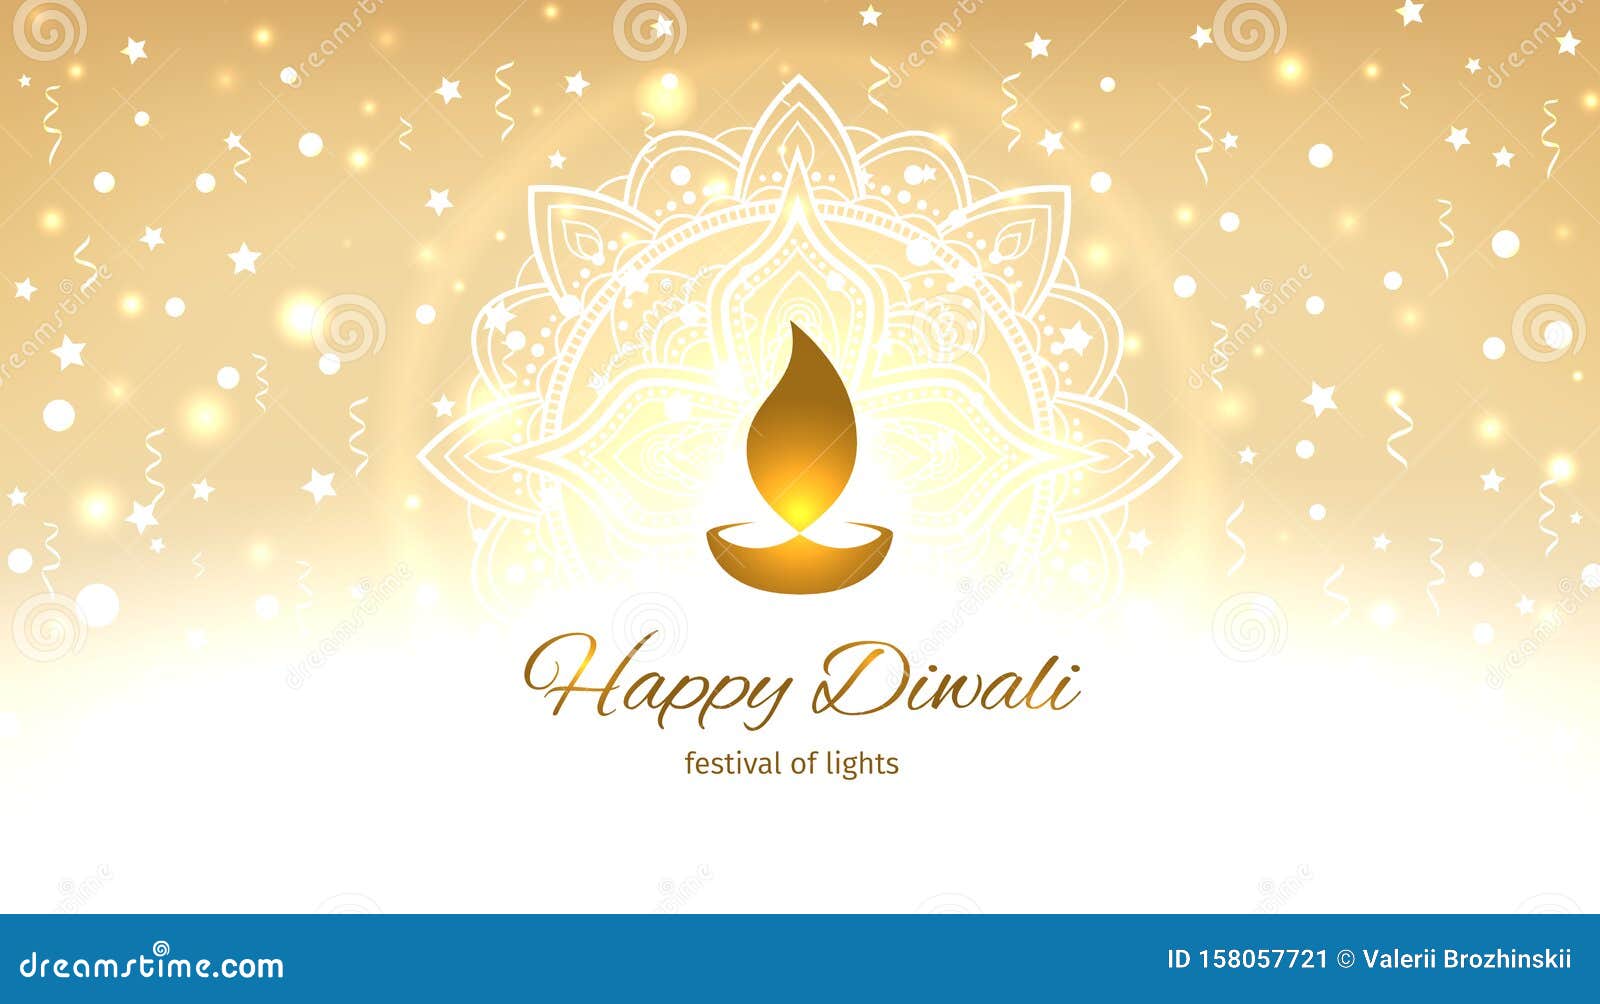 Happy Diwali Vector Illustration. Design Template with Light ...